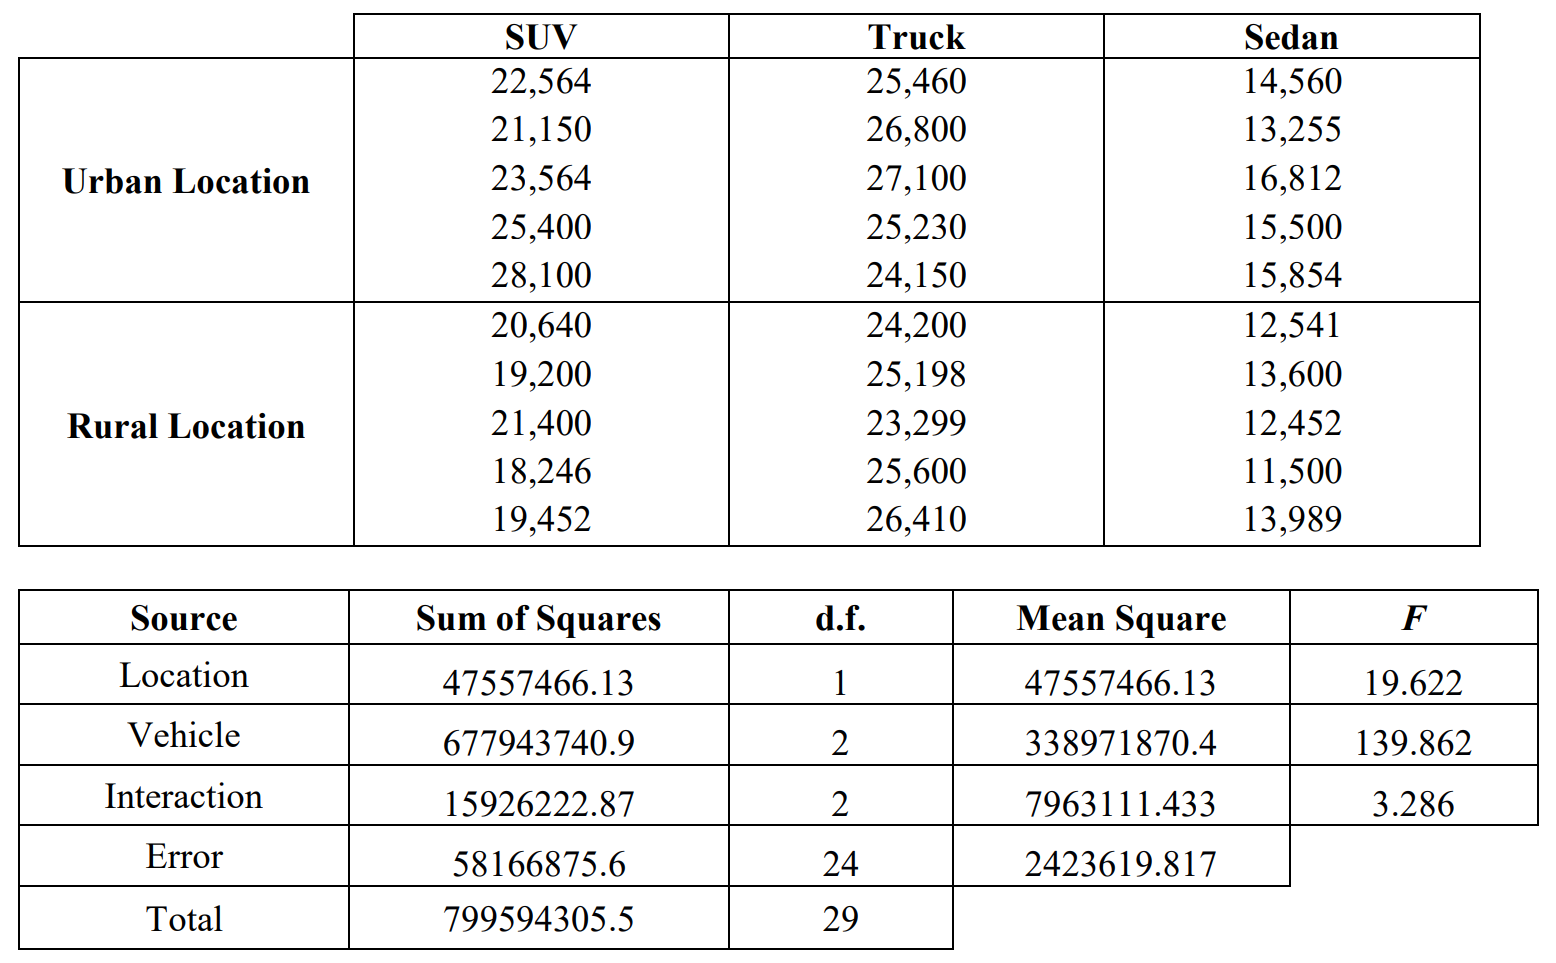 Data table for prices of used vehicles in 6 categories, divided by vehicle type (SUV< truck, sedan) and location (rural, urban). Completed two-factor ANOVA table based on the data table.